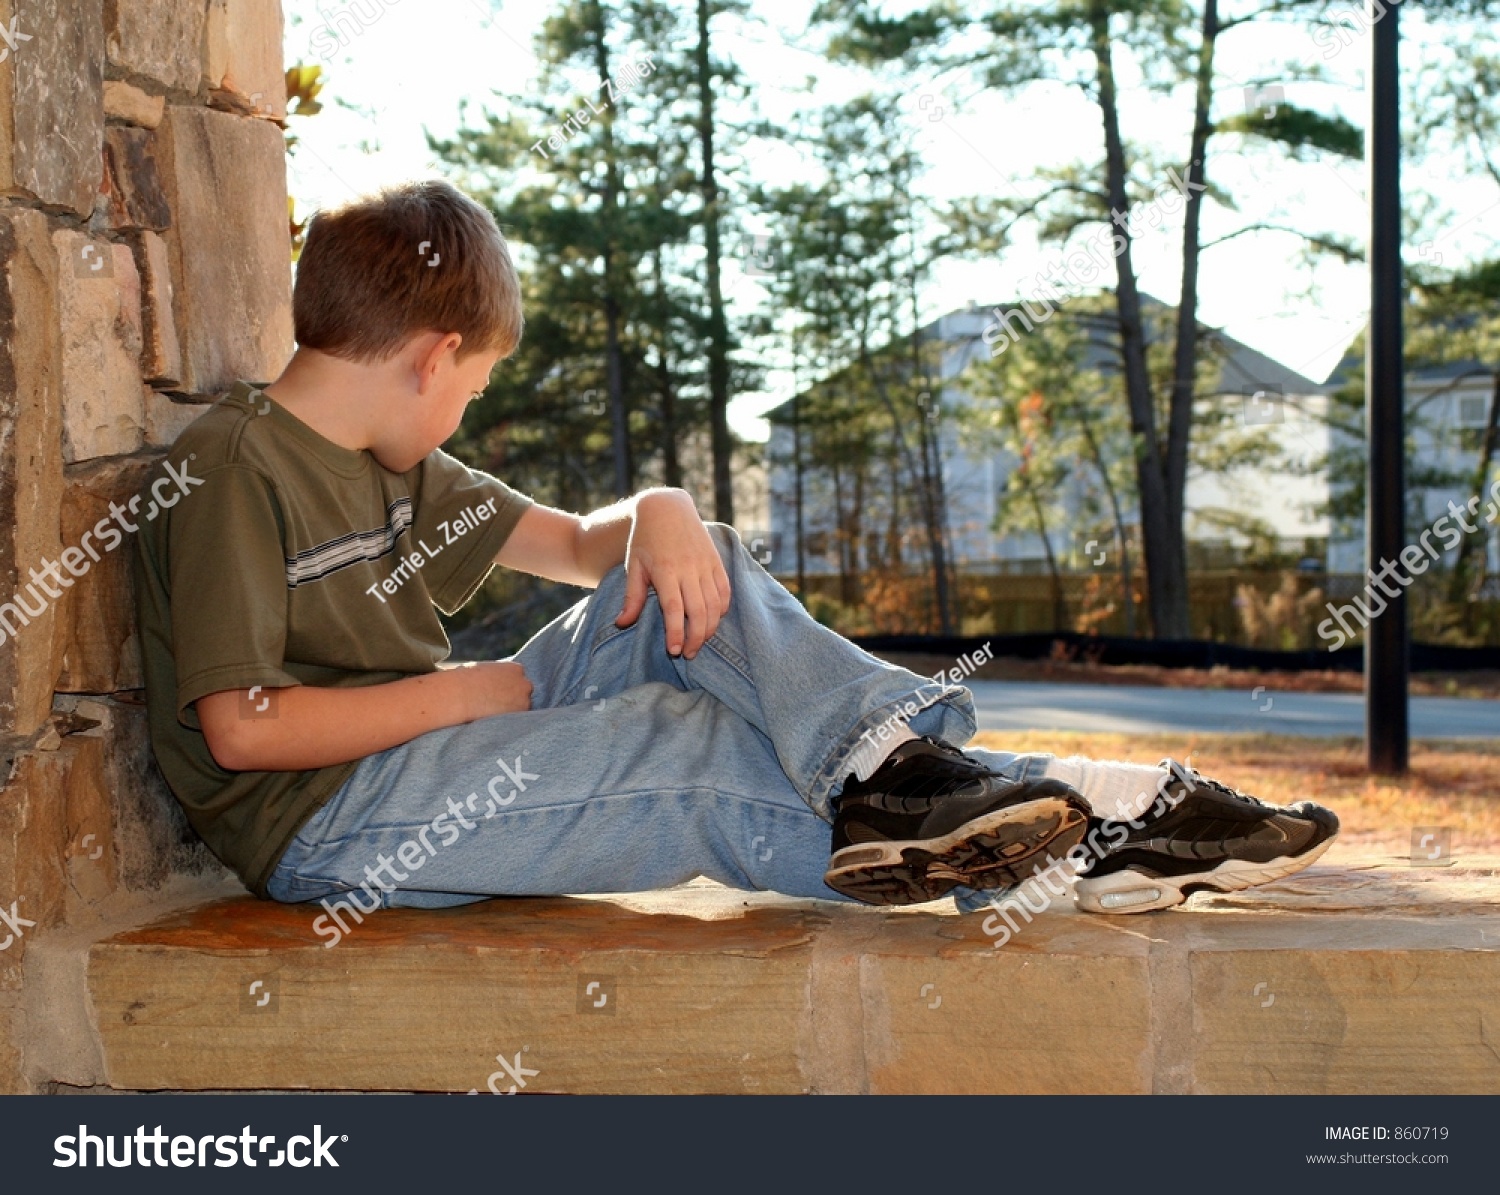 Cute Teen Boy Leaning Against Cement Stock Photo 64119688 